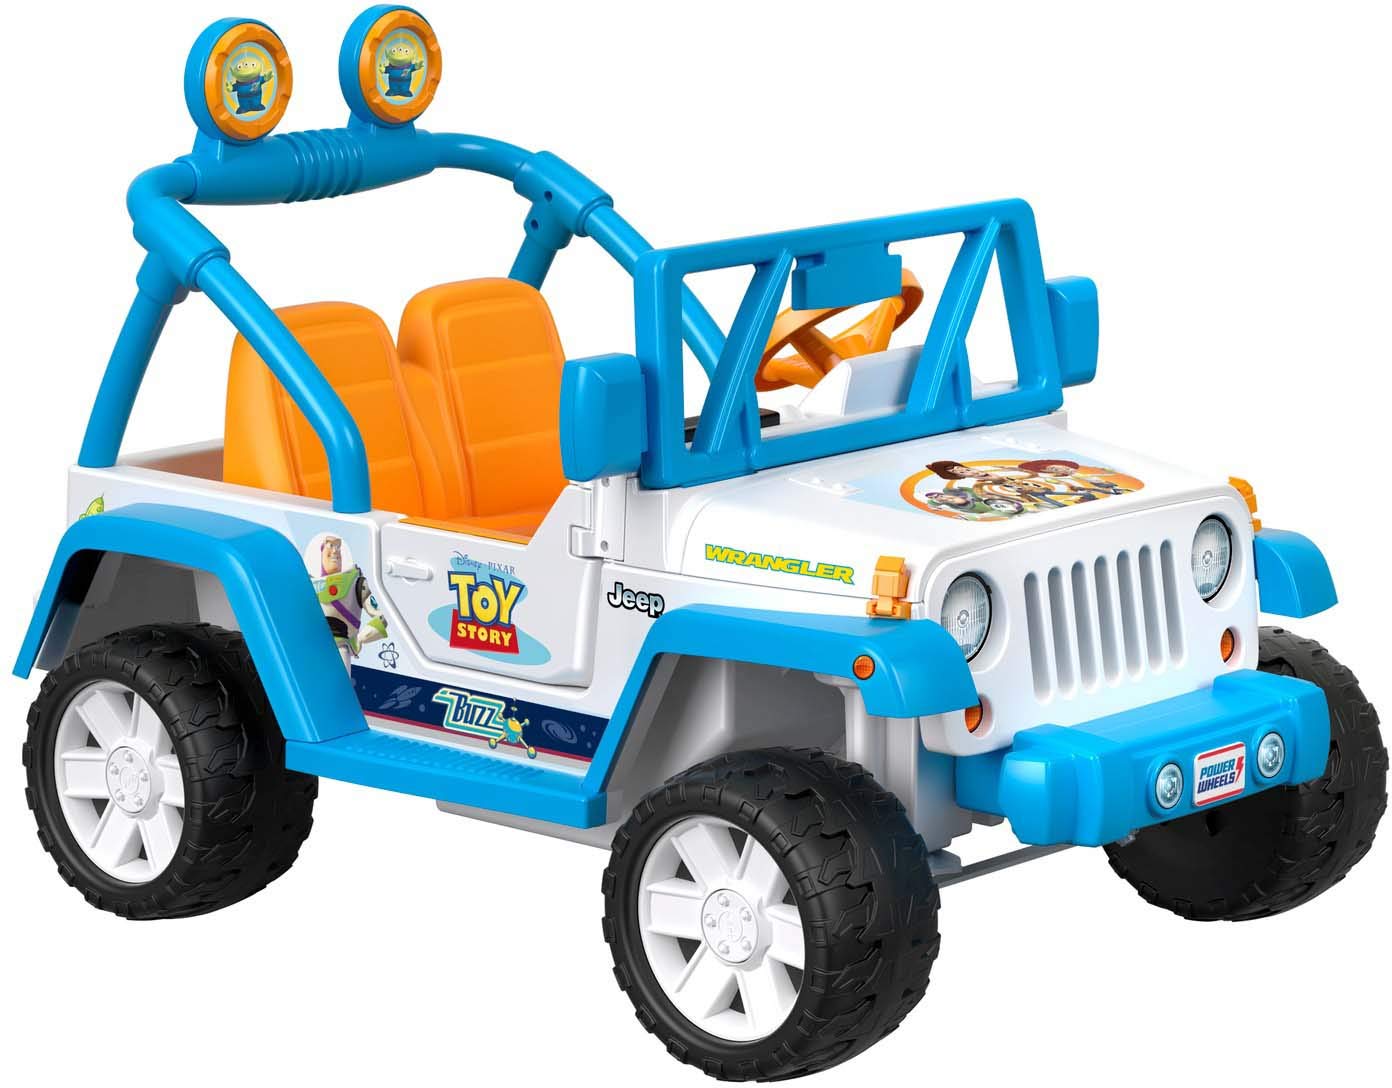 Toy Story Jeep Wrangler Power Wheels From Fisher Price